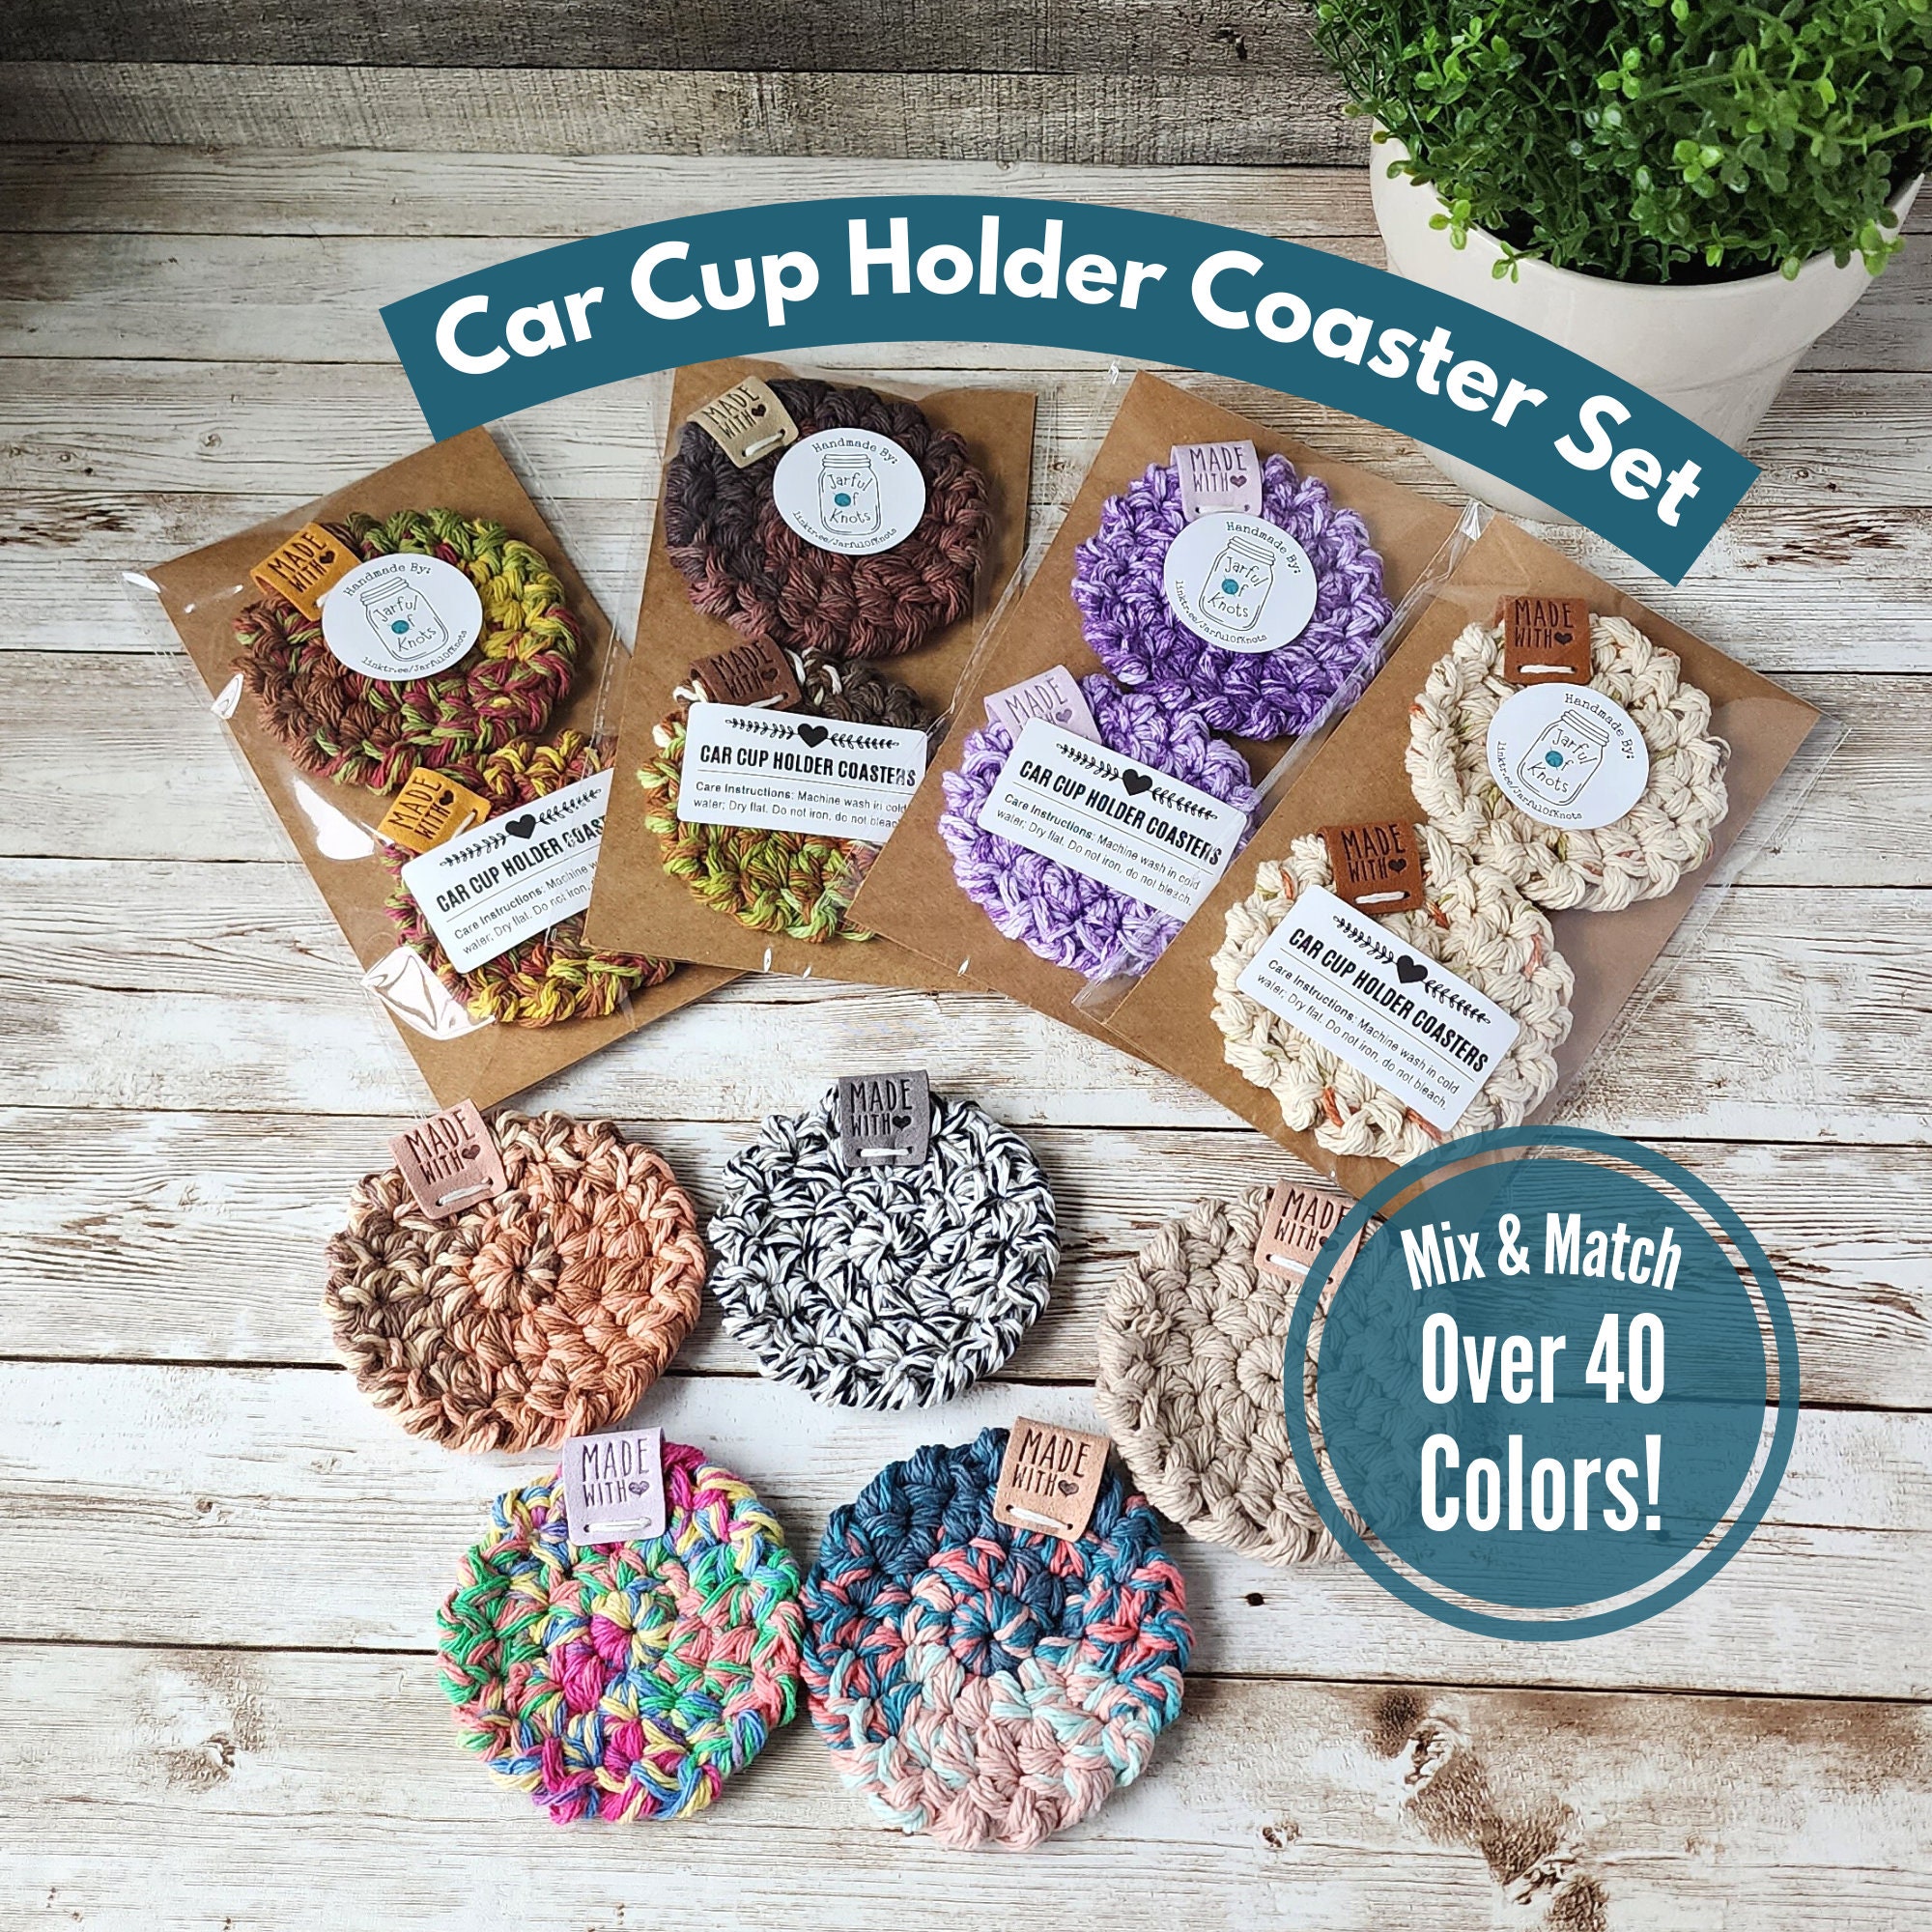 2 Pack Machine Washable Car Cup Holder Coasters, Mix Match Color